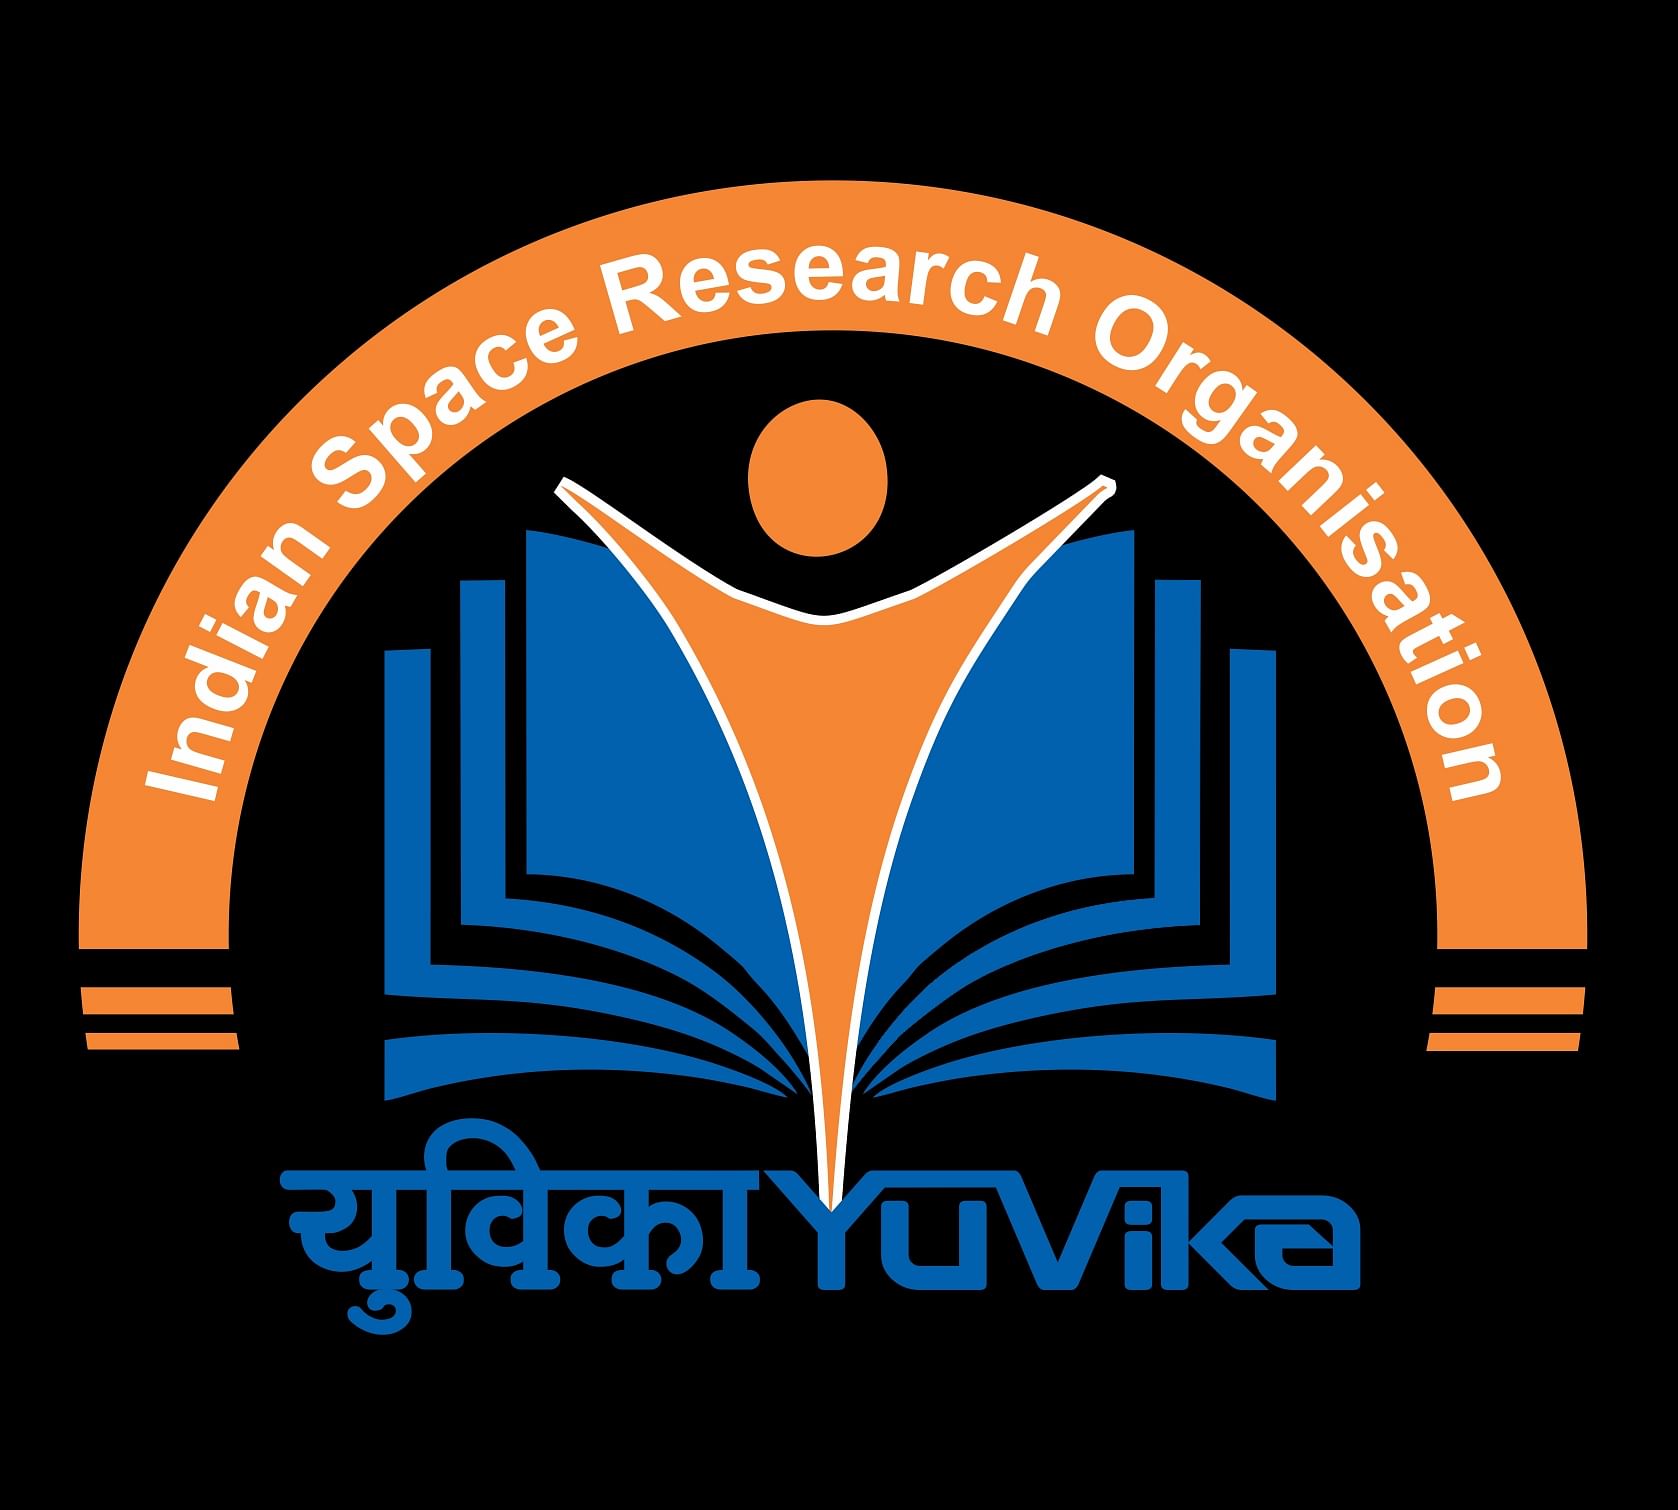 ISRO Young Scientist Programme 2020: Certificate Uploading Date Extended Upto April 02